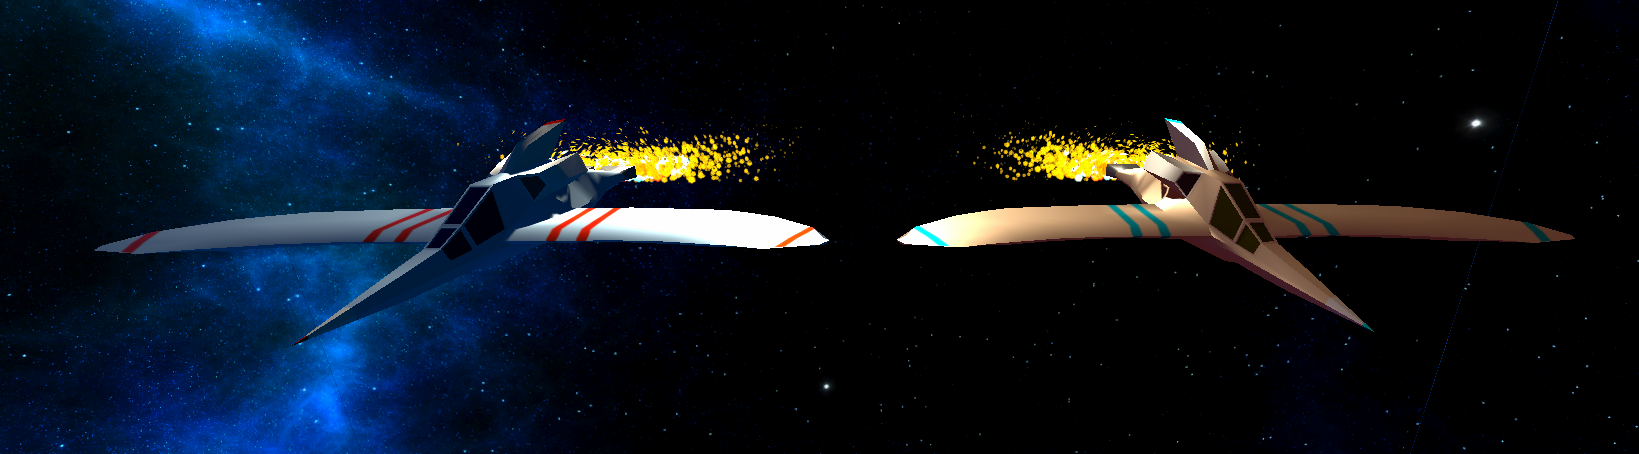 Player 1's ship is on the left and Player 2's ship is on the right. Player 1's ship is also the single player ship.